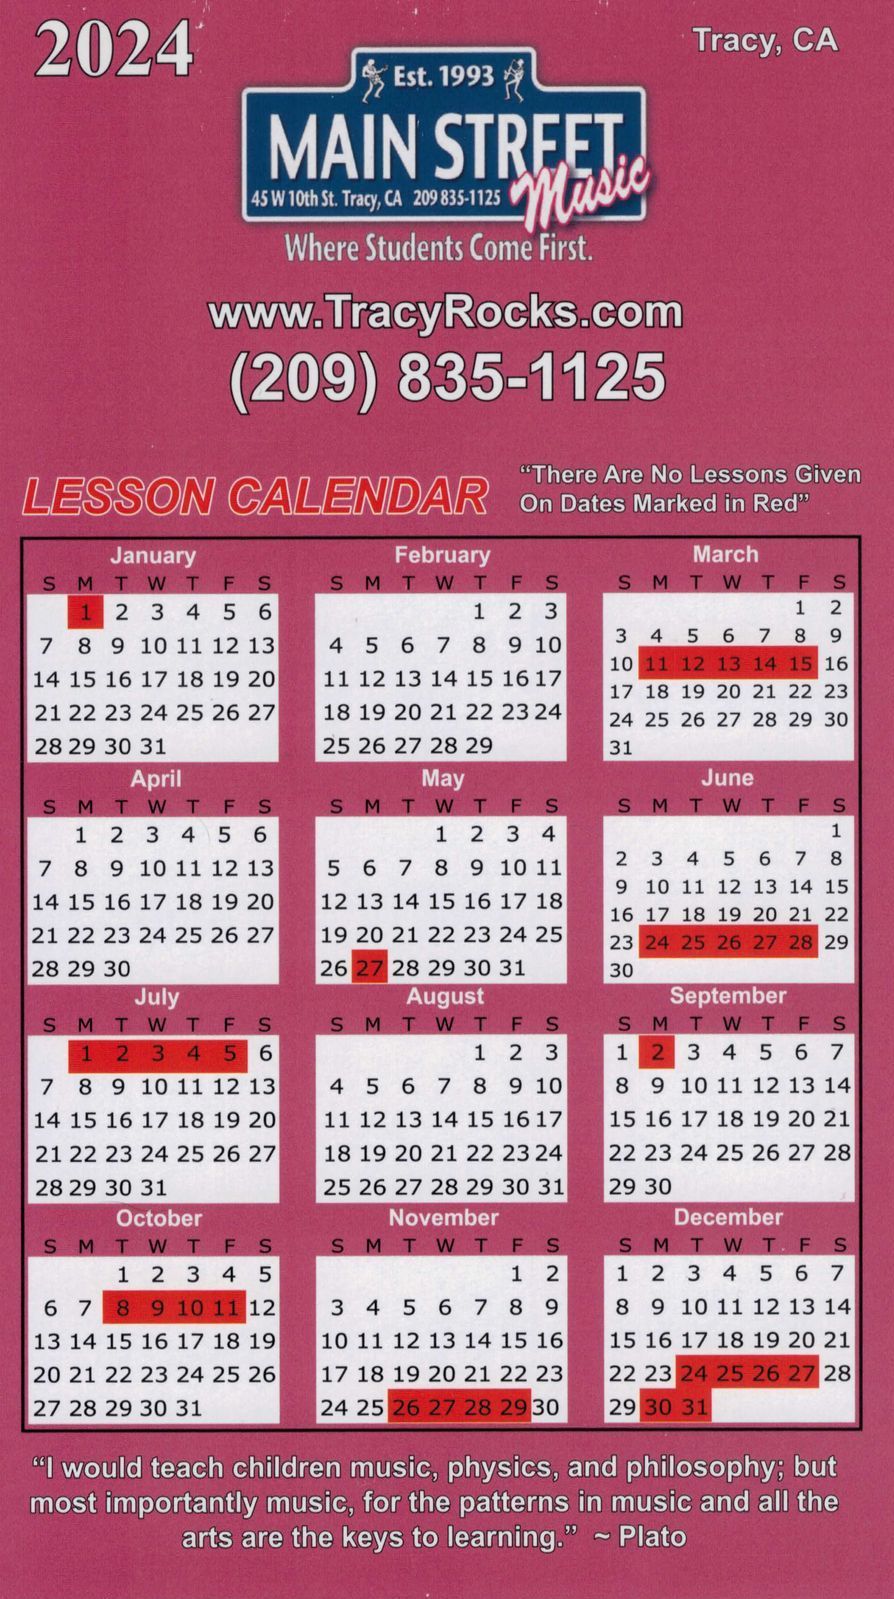 a music lesson calendar for the year 2024 is displayed on a pink background